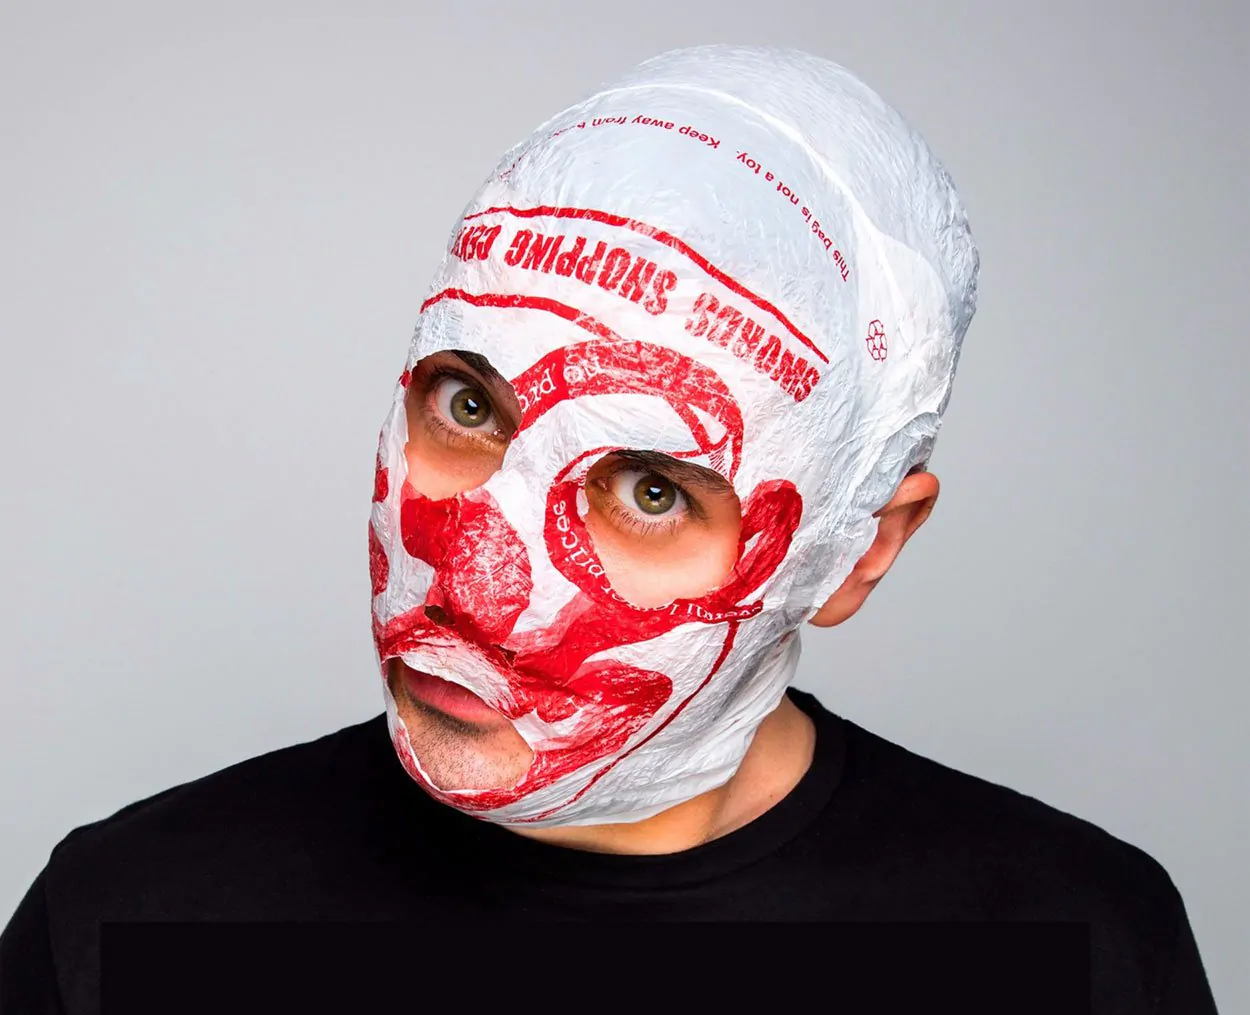 THE BLINDBOY PODCAST comes to Ulster Hall, Belfast on Thursday 23 April 2020